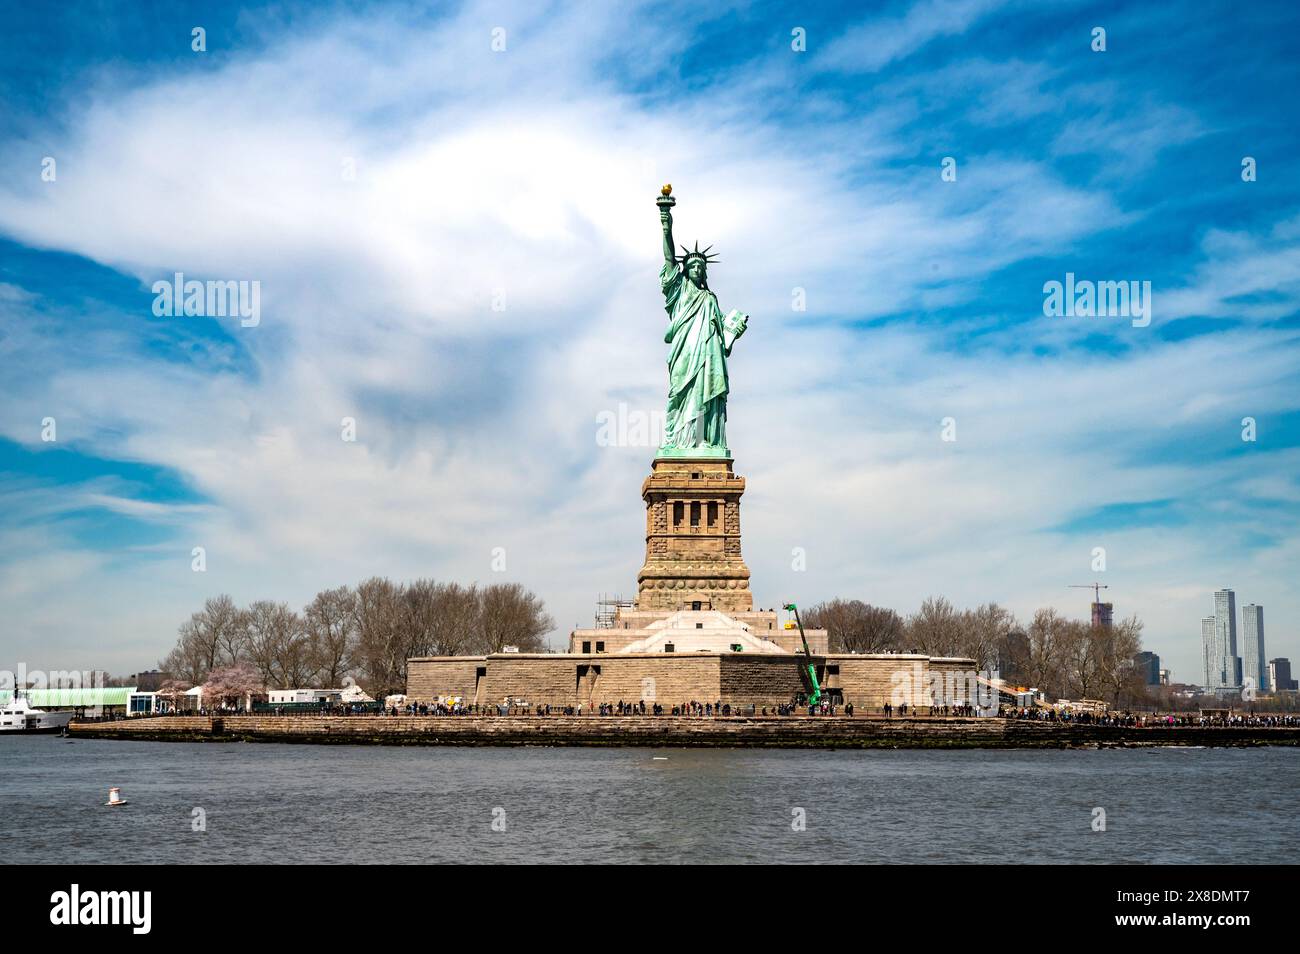 Lady Liberty lights the way! Capture the iconic symbol of freedom, her torch held high against a clear blue sky. Ideal for travel and history content. Stock Photo